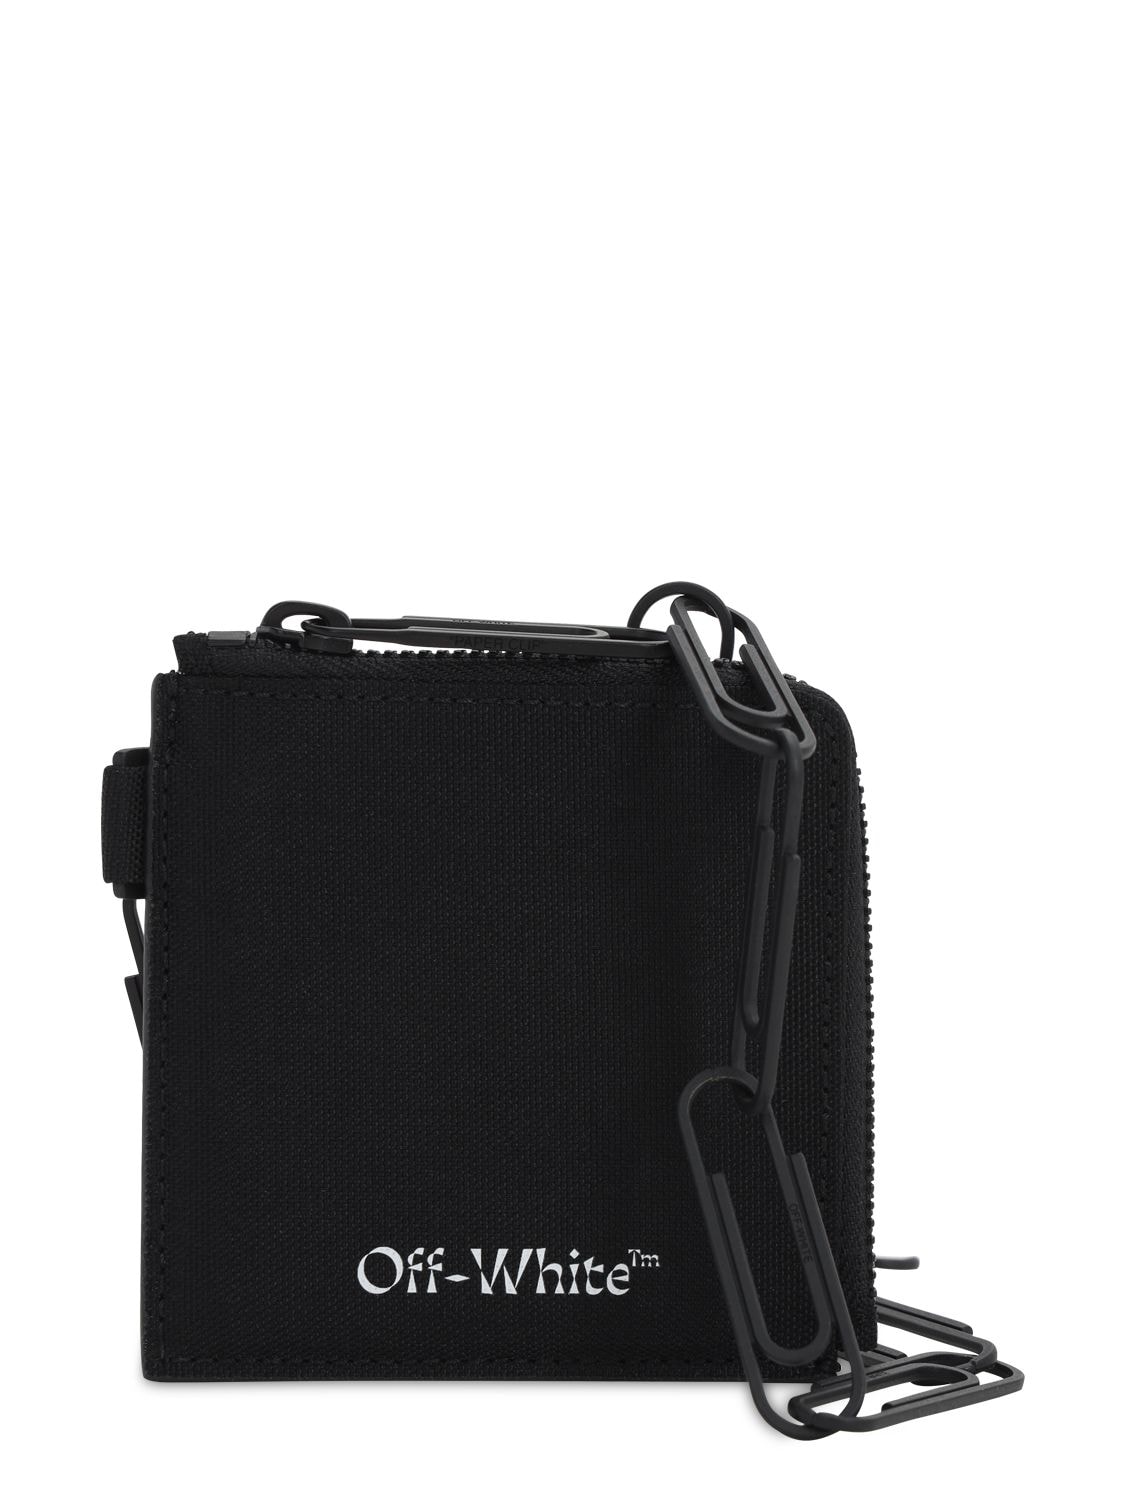 OFF-WHITE LOGO ZIP LEATHER CHAIN WALLET,71IJS5013-MTAWMA2